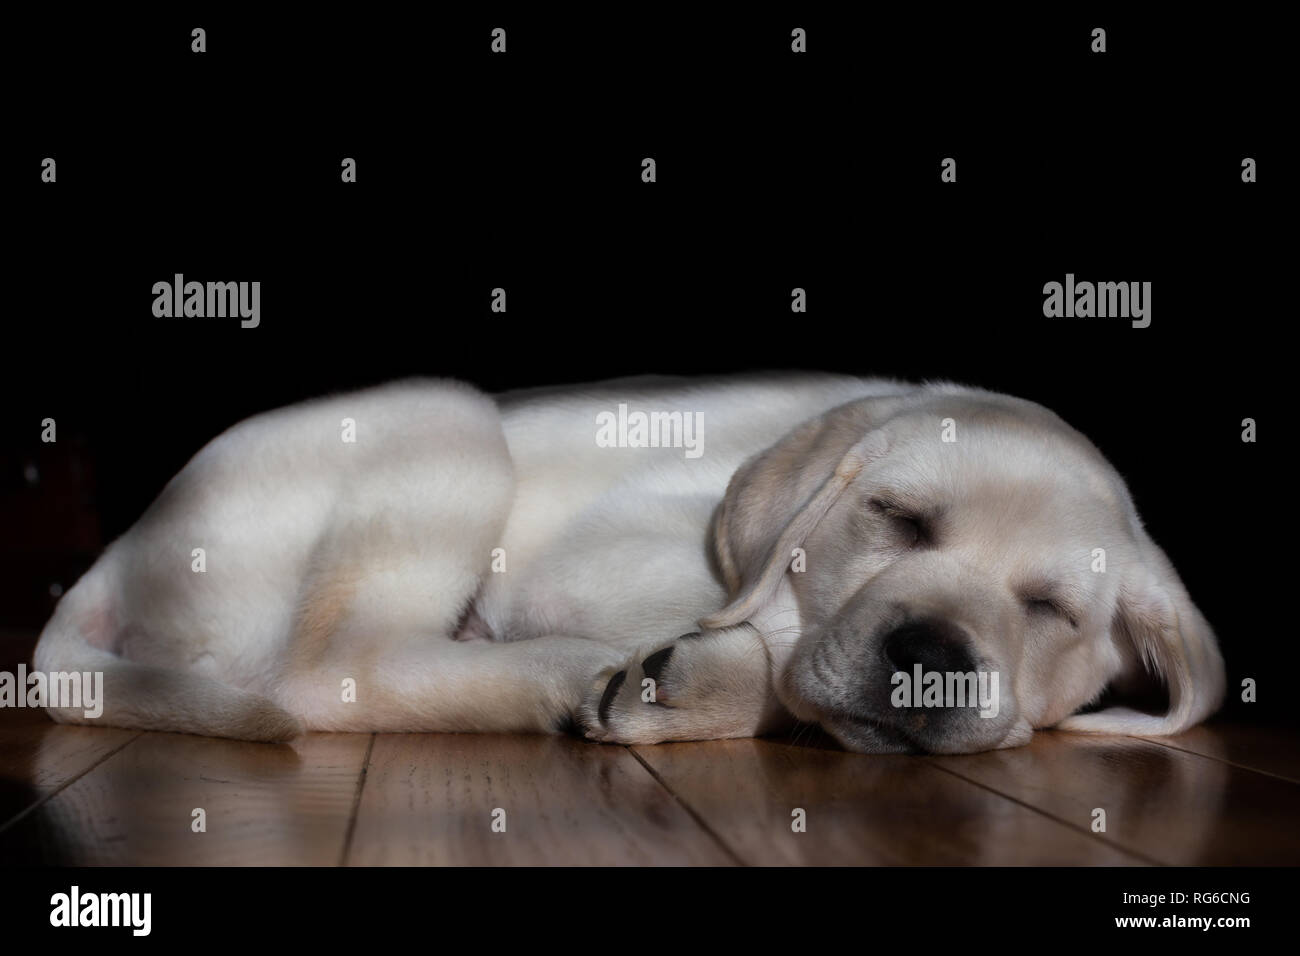 Adorable 9-week old yellow labrador puppy sleeping peacefully on a hardwood floor. The sun filters in through a window onto the sweet puppy's face. Stock Photo